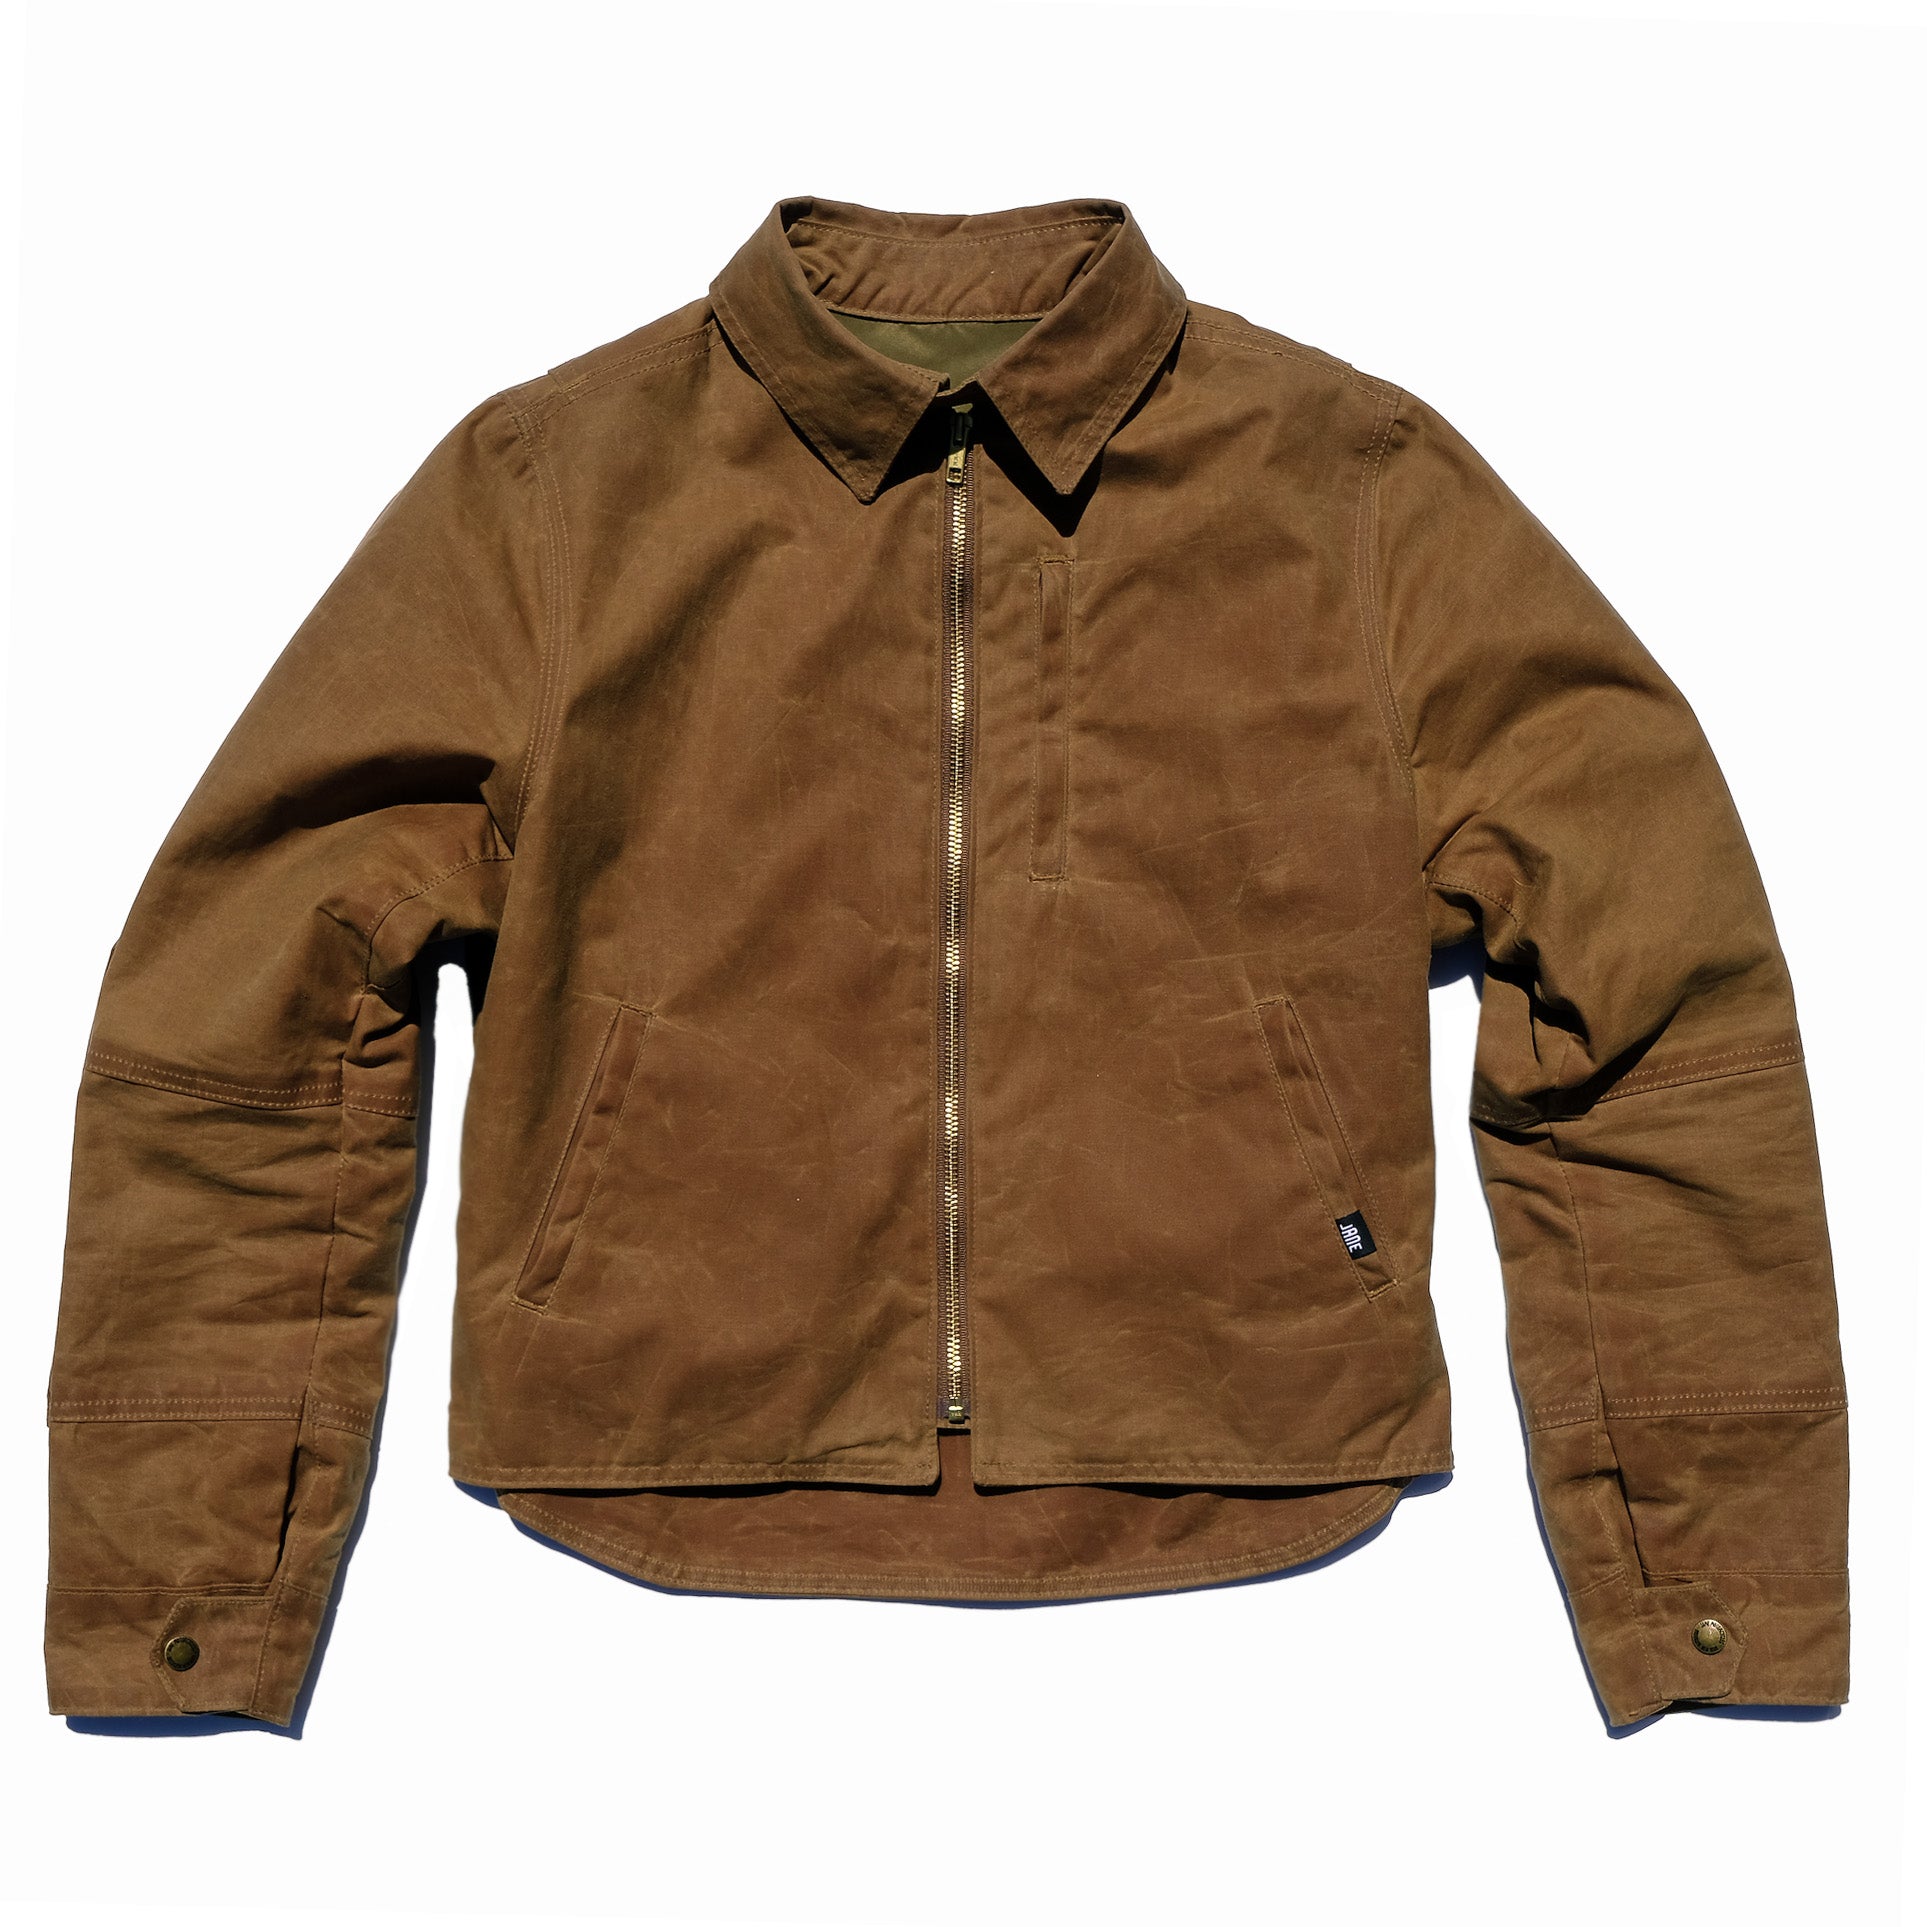 The Women's Driggs Waxed Canvas Field Tan Riding Jacket